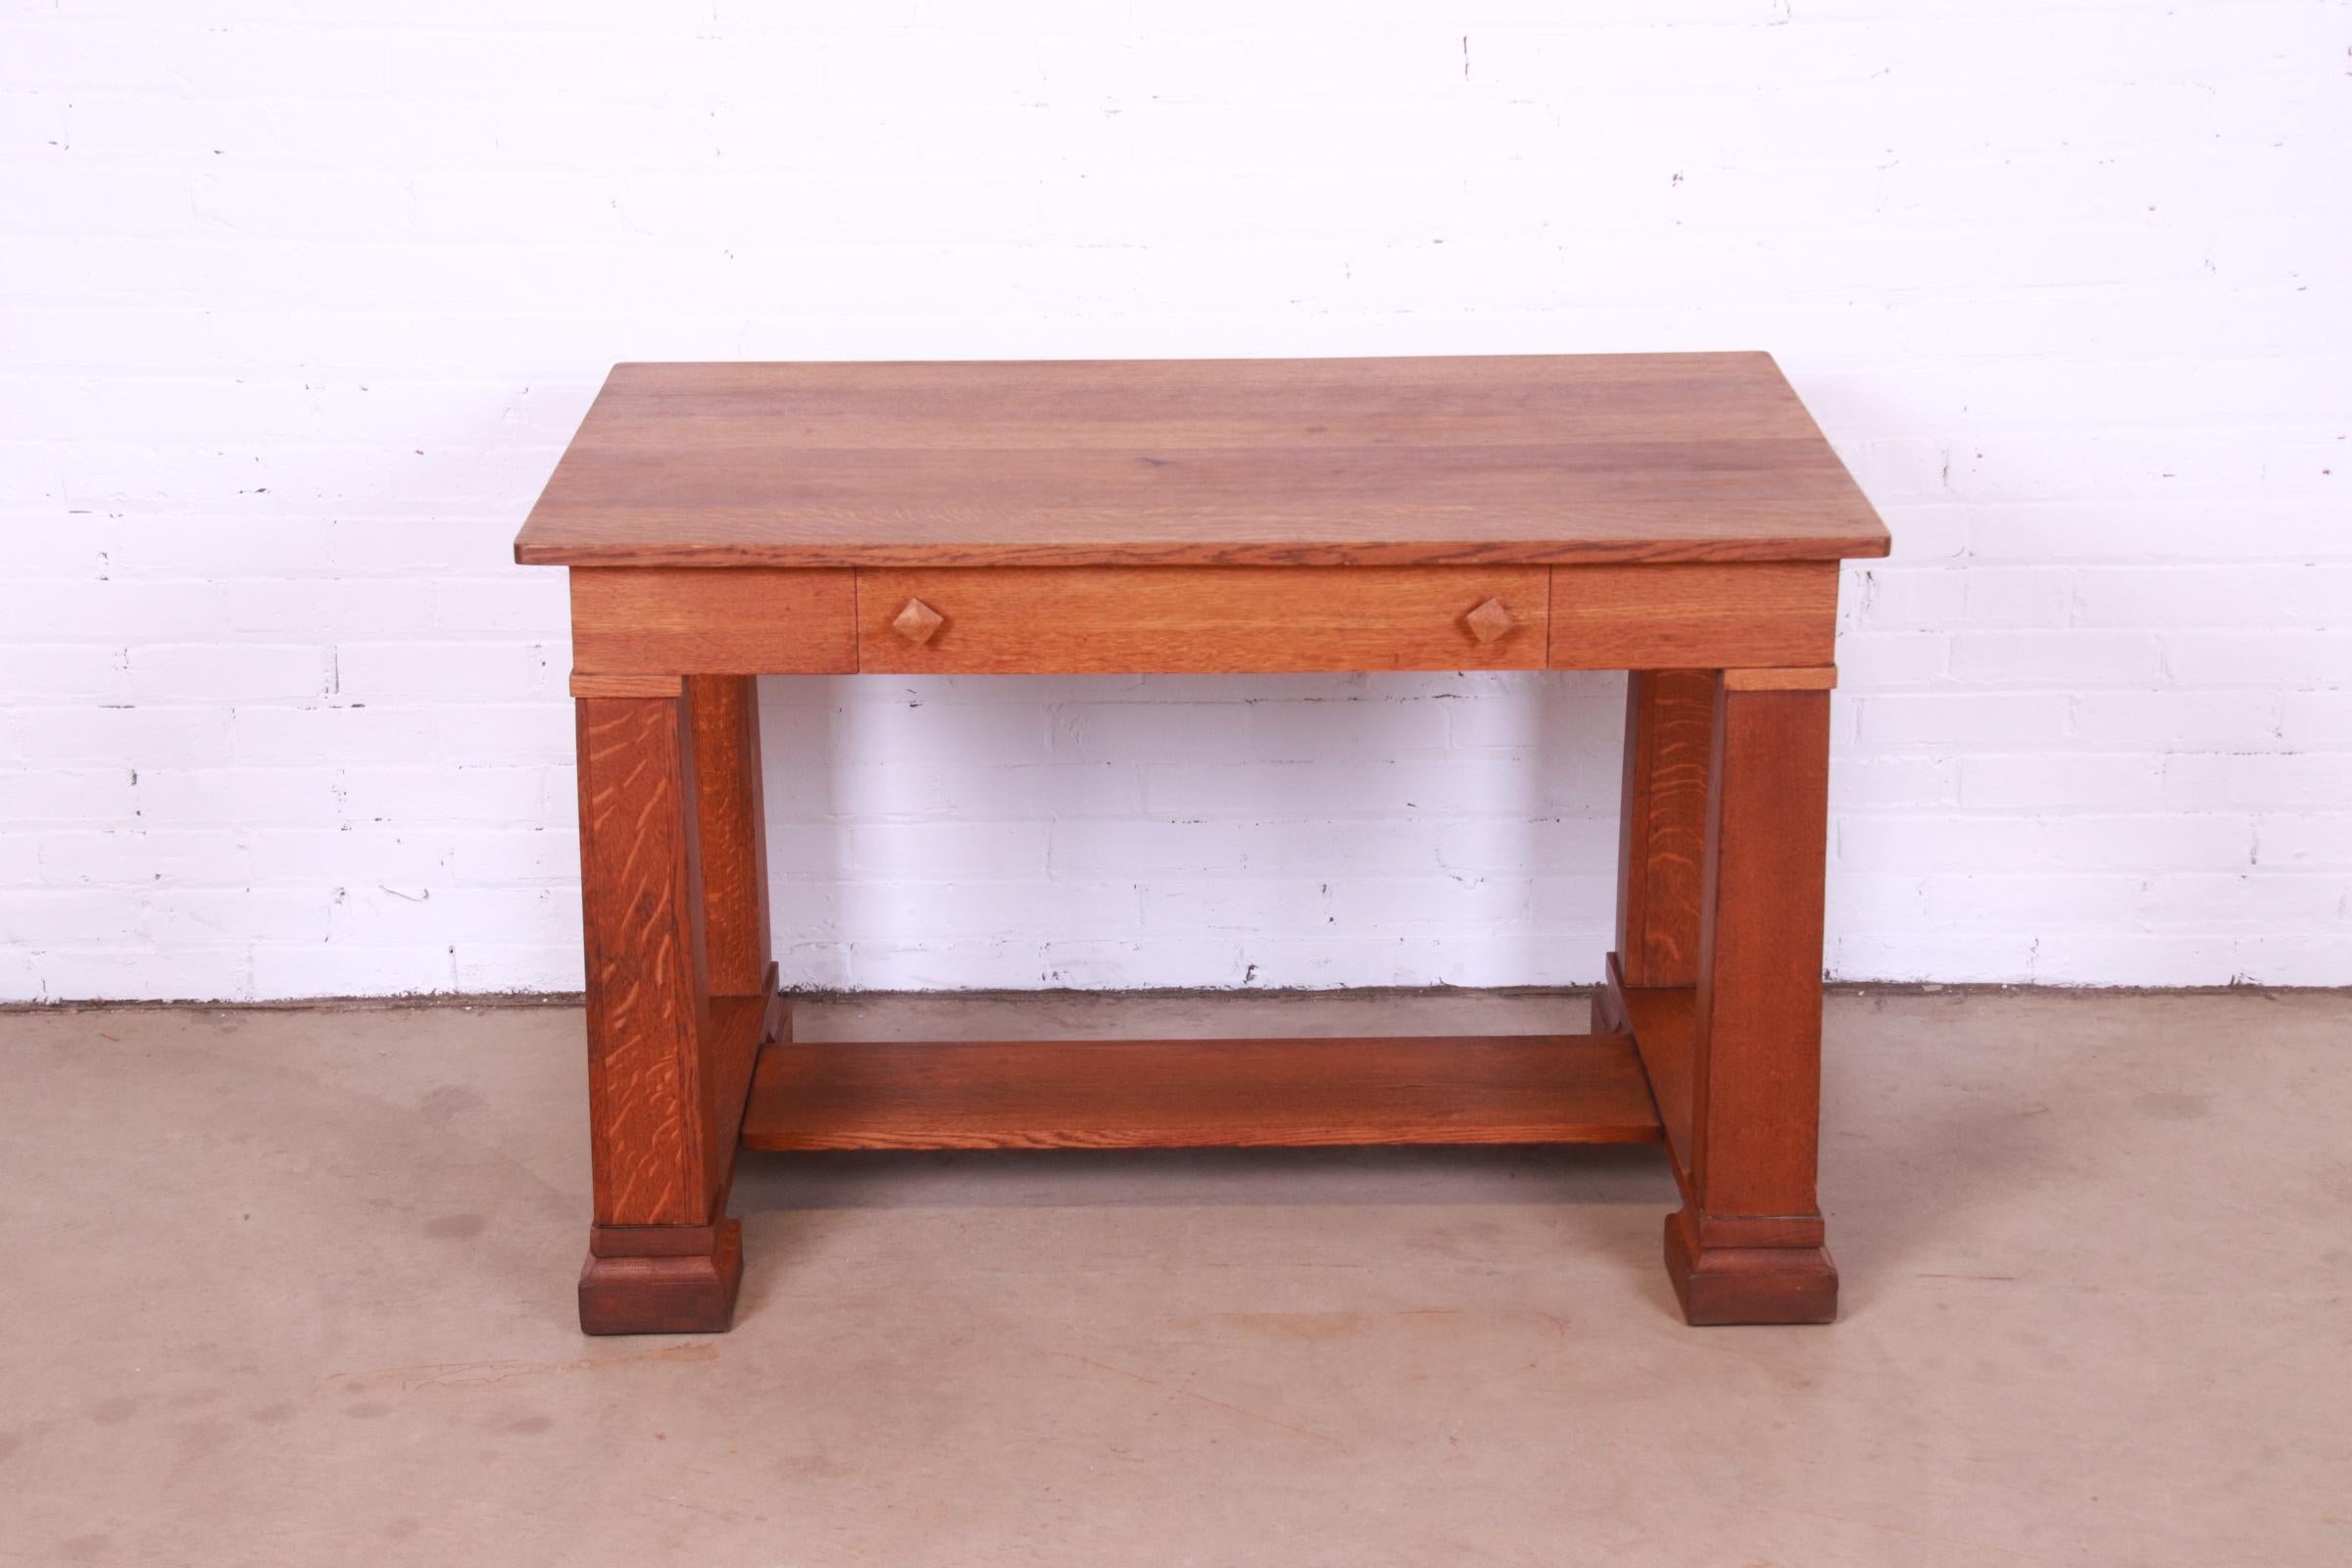 A beautiful antique Mission Arts & Crafts quarter sawn oak writing desk or library table

Recently procured from Frank Lloyd Wright's DeRhodes House

In the manner of Stickley

USA, Circa 1900

Measures: 45